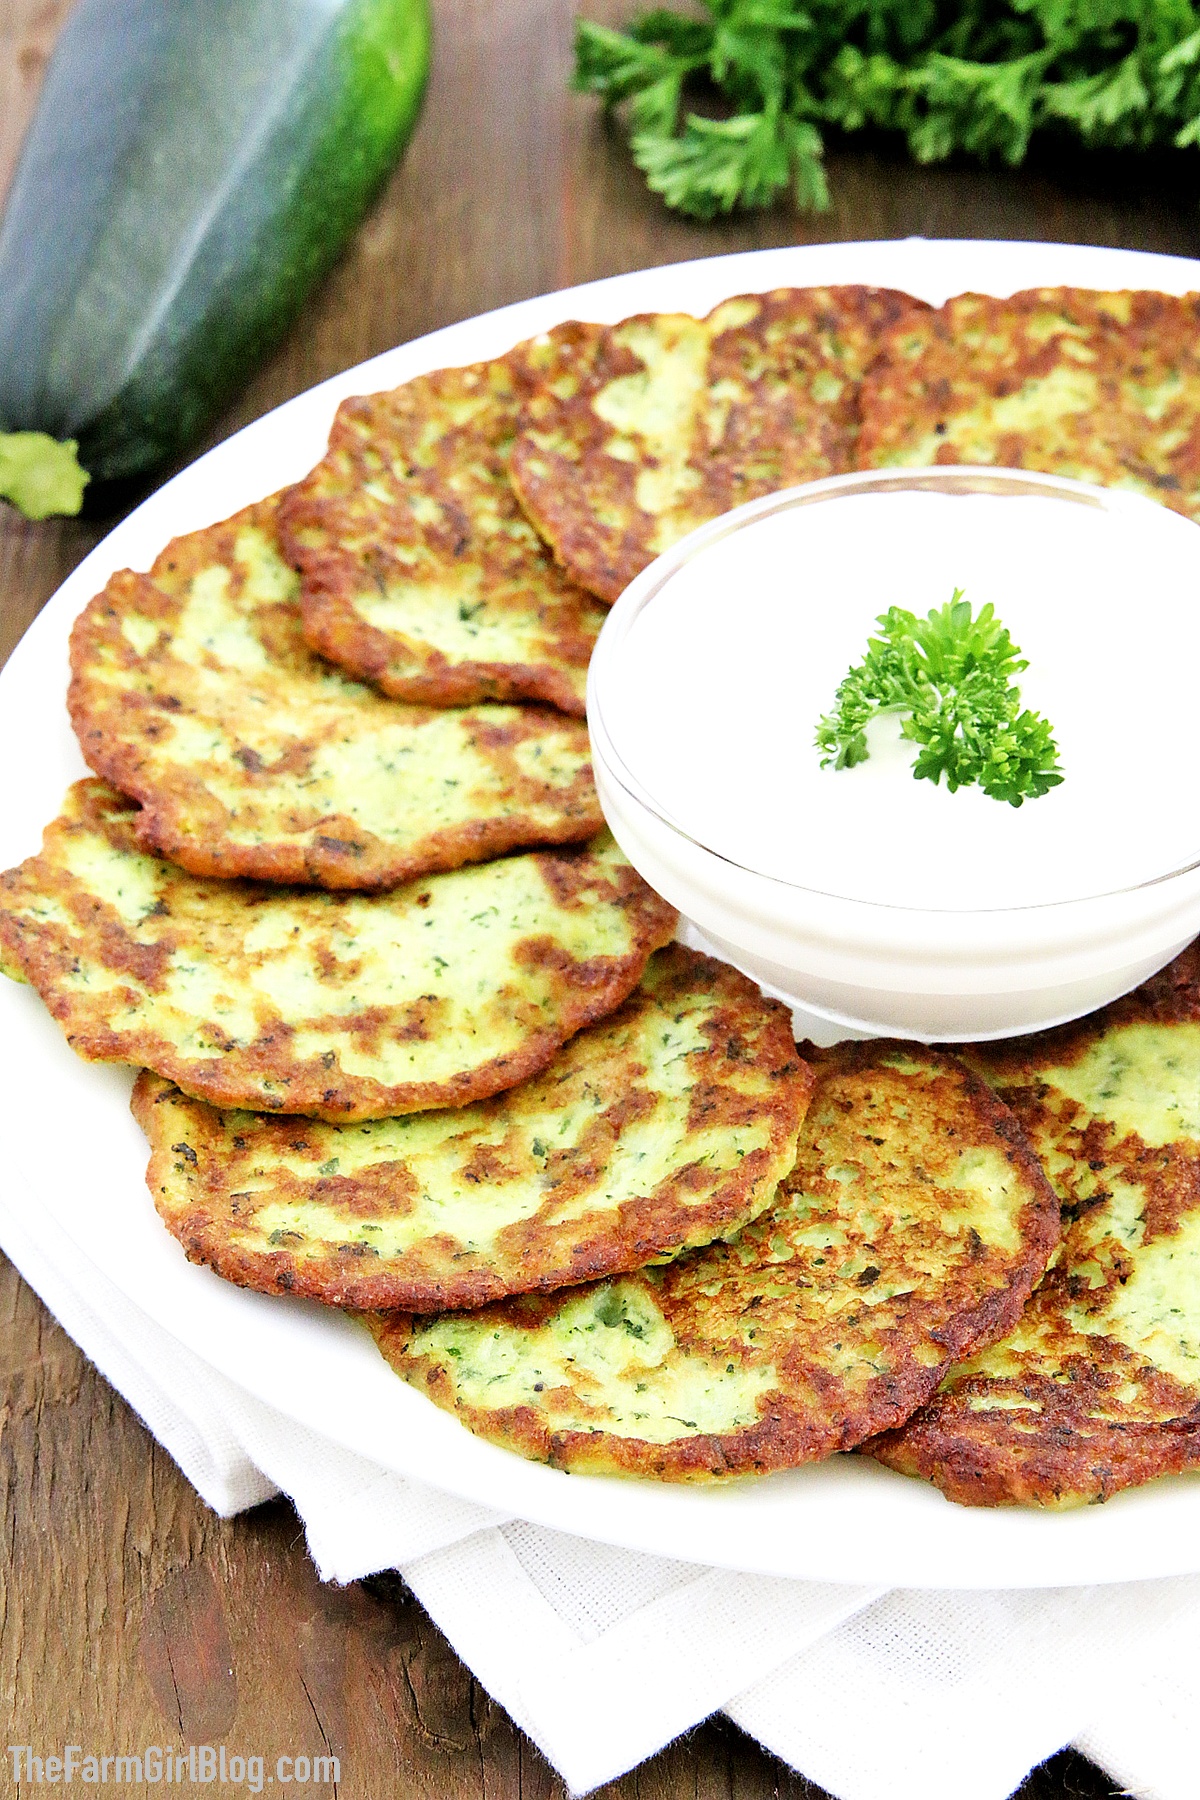 These Zucchini Pancakes are a wonderful way to enjoy the abundance of your garden-fresh zucchinis. They are golden and crisp on the outside and soft and moist on the inside. The addition of fresh homegrown garlic adds a savory, robust kick. There's so much flavor in these pancakes, you just can't stop enjoying them. #zucchinipancakes #homegrownzucchini #organicgarlic #organiczucchini #thefarmgirlblog